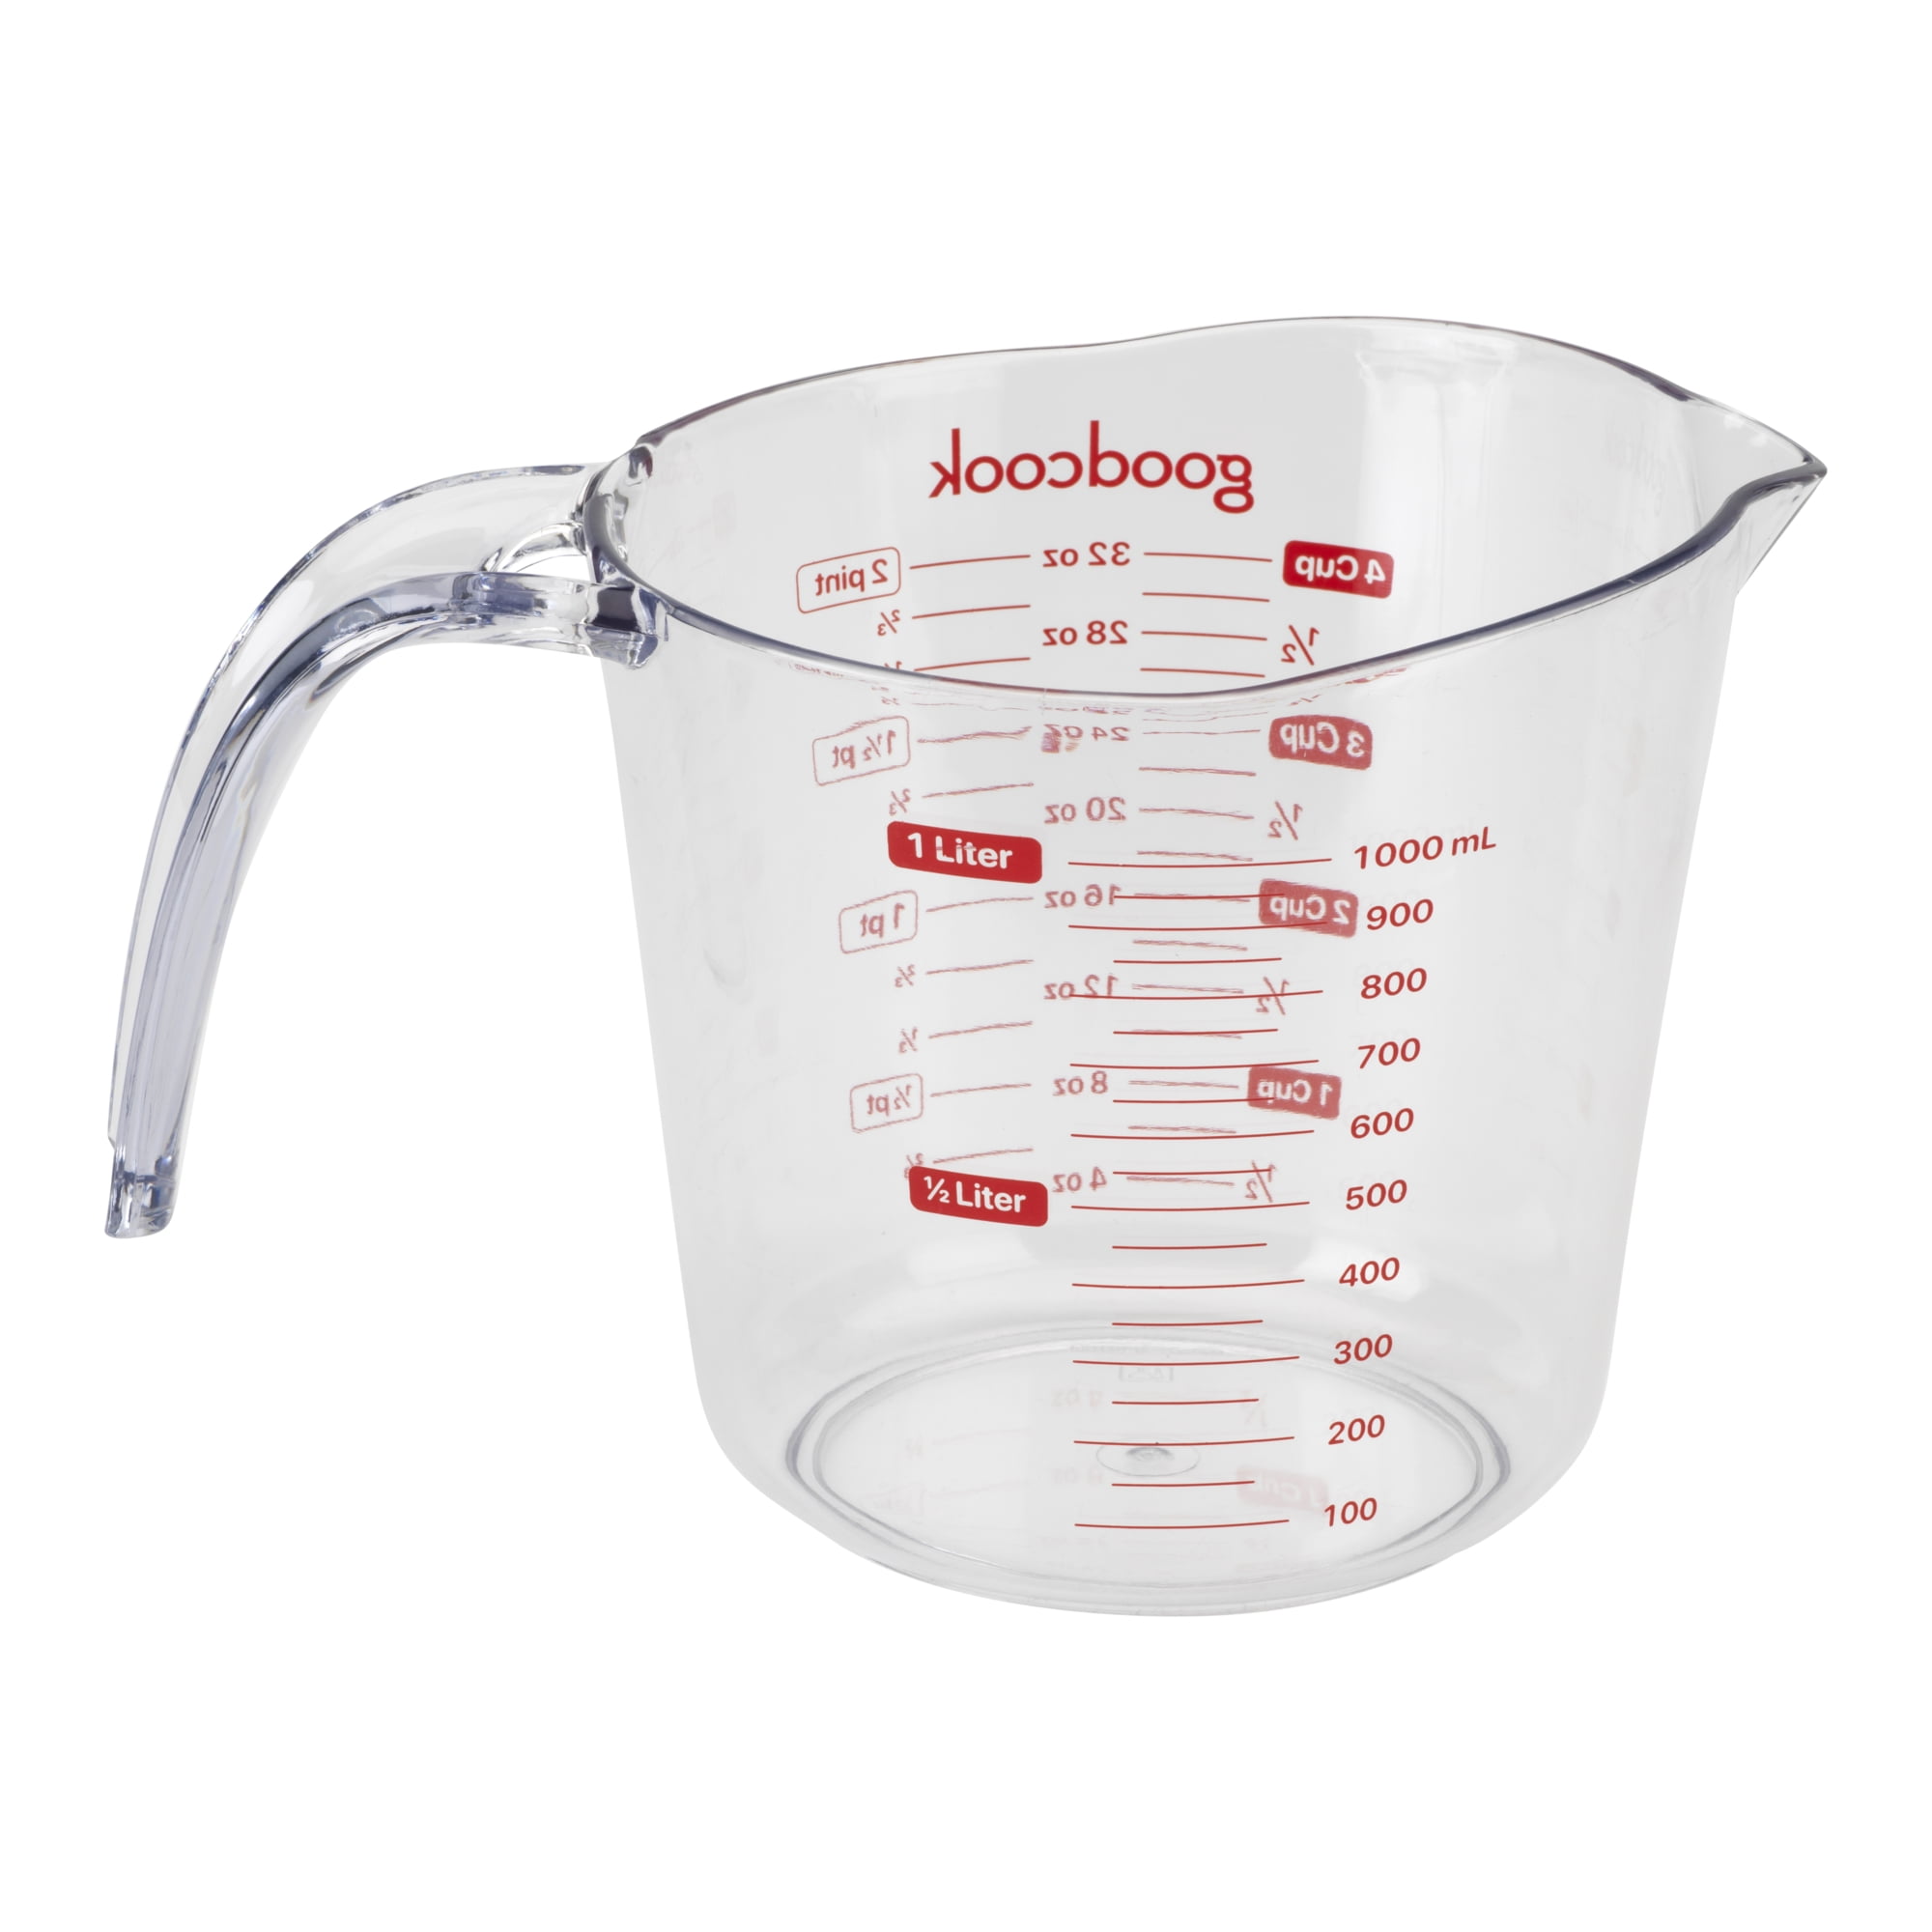 GoodCook PROfreshionals 2-Cup (500 mL) Plastic Measuring Cup, Clear/Red 